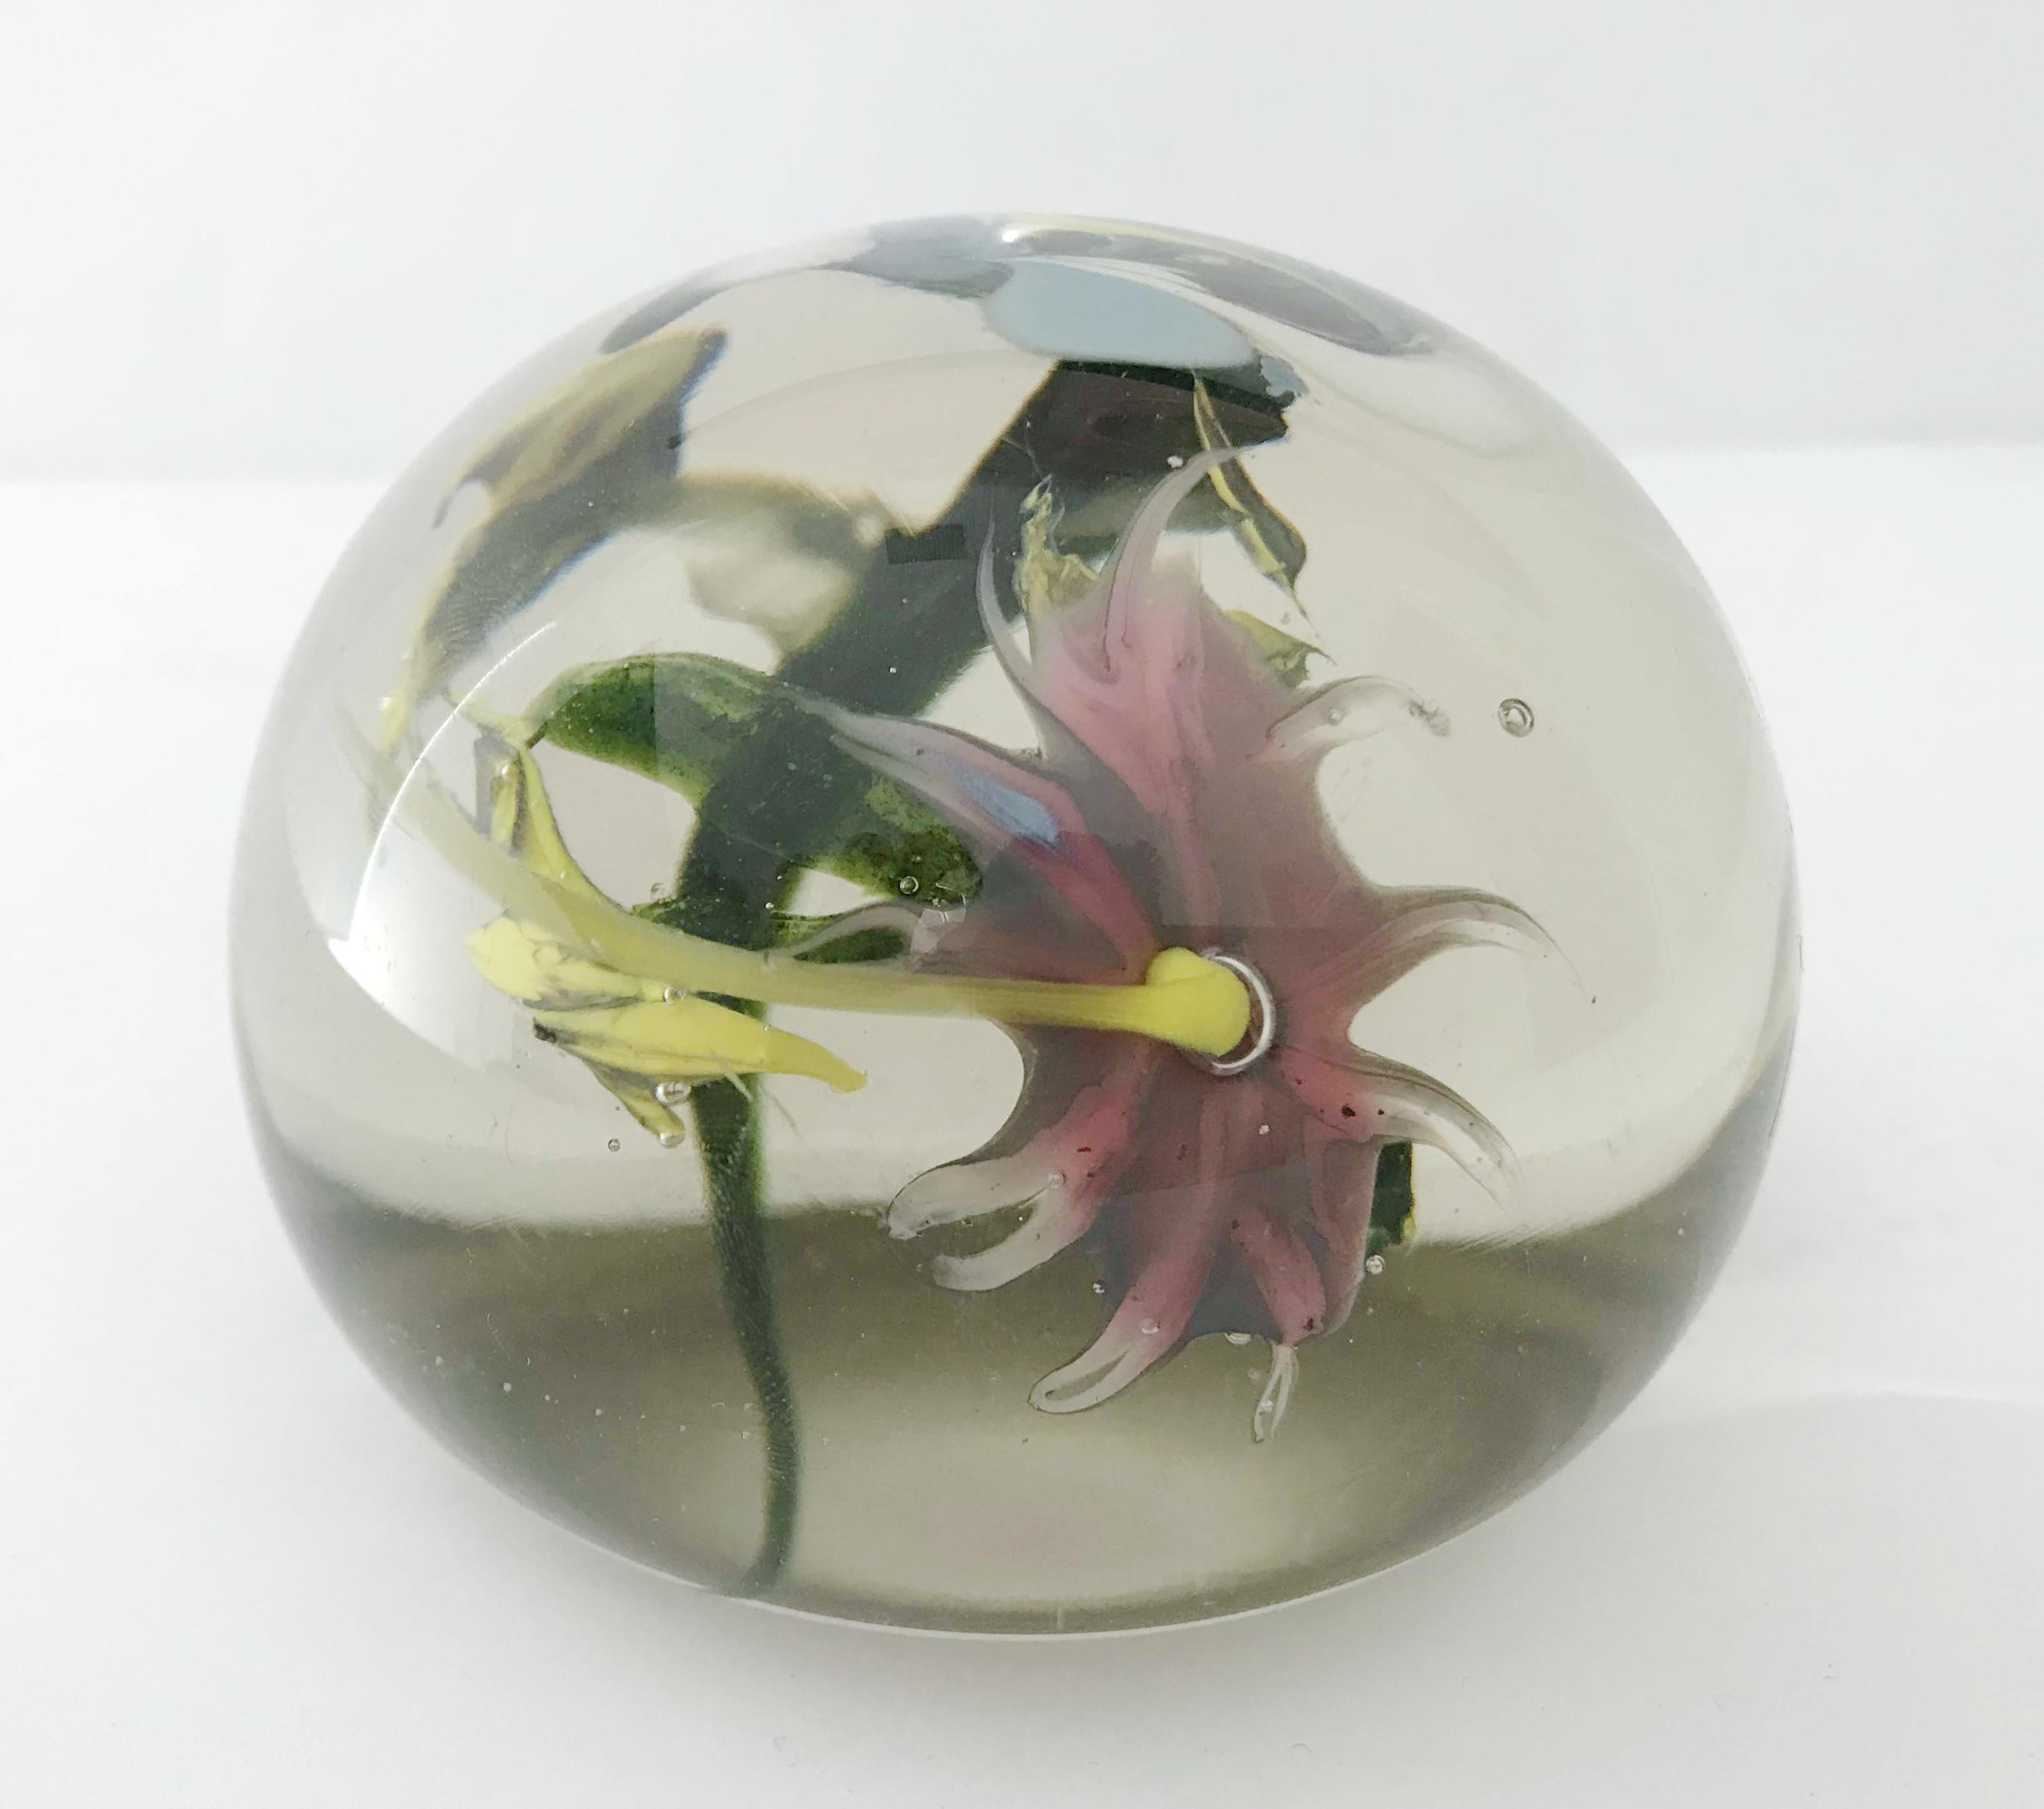 Vintage Italian Murano glass paperweight hand blown with multicolored flowers and leaves, made in Italy, circa 1960s
Measures: Diameter 3.5 inches, height 2.5 inches
1 in stock in Los Angeles
Order reference #: FABIOLTD G133
This piece makes for a